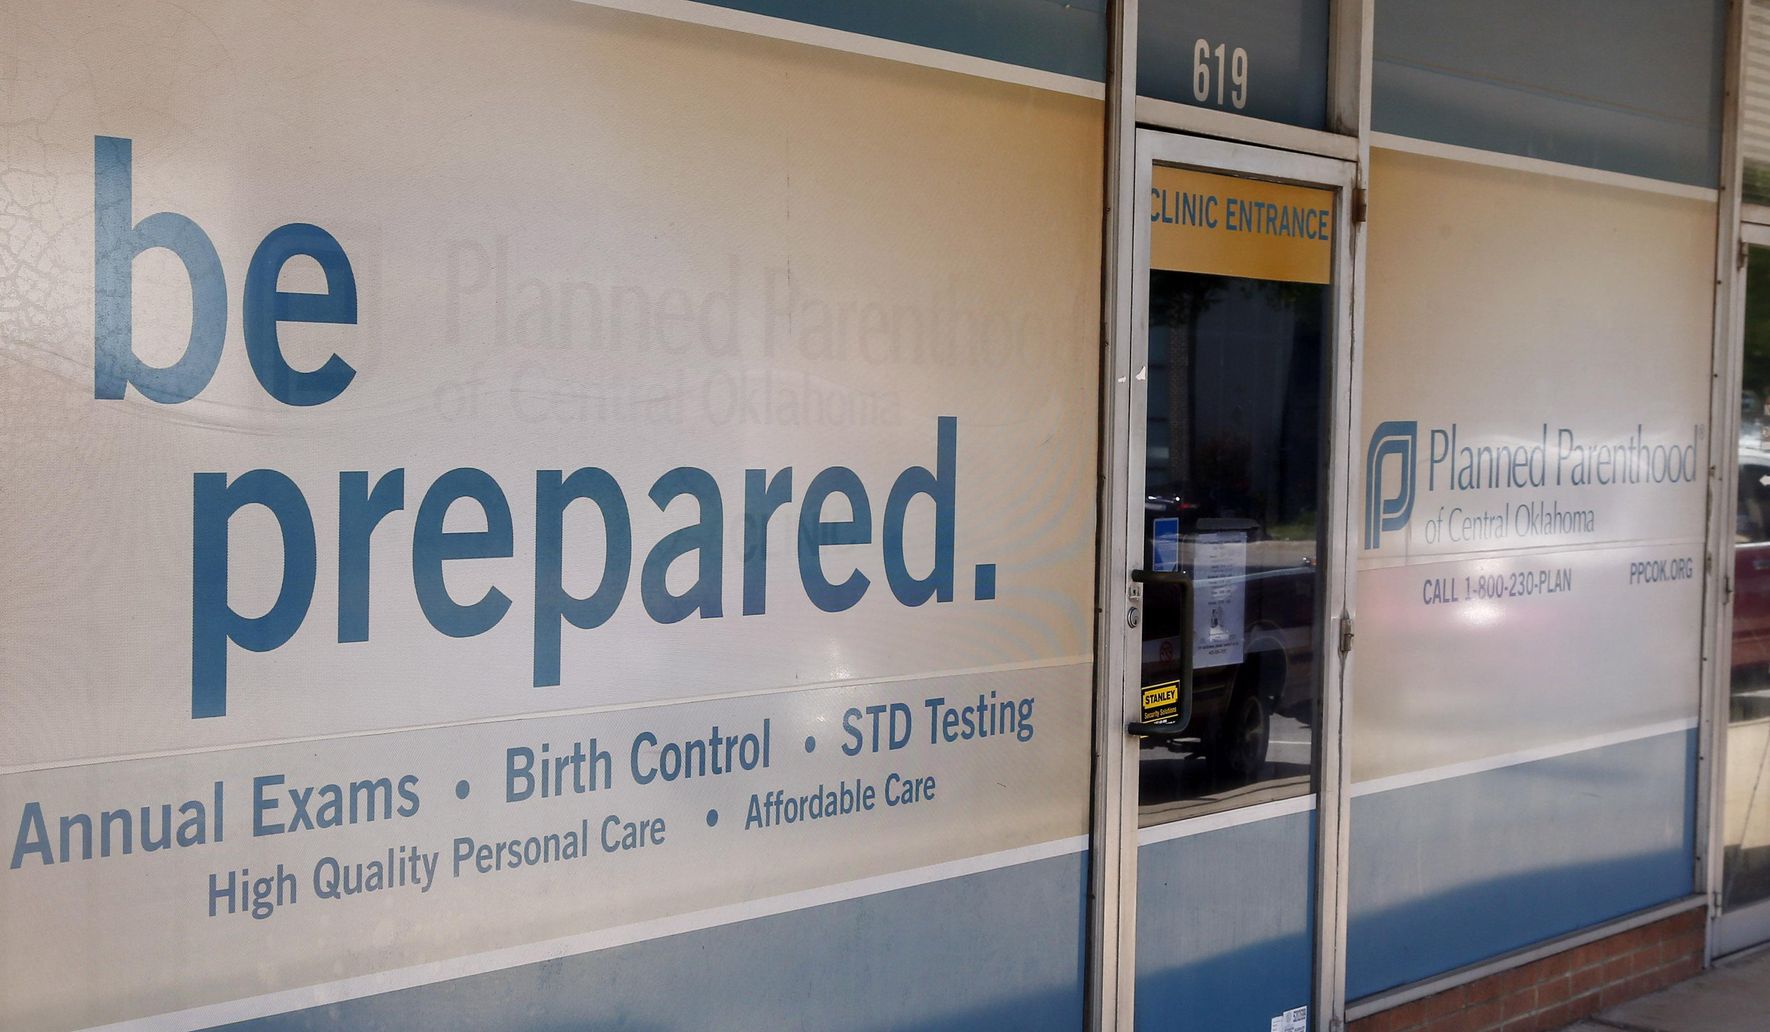 Planned Parenthood failed to report 13-year-old girl’s abuse